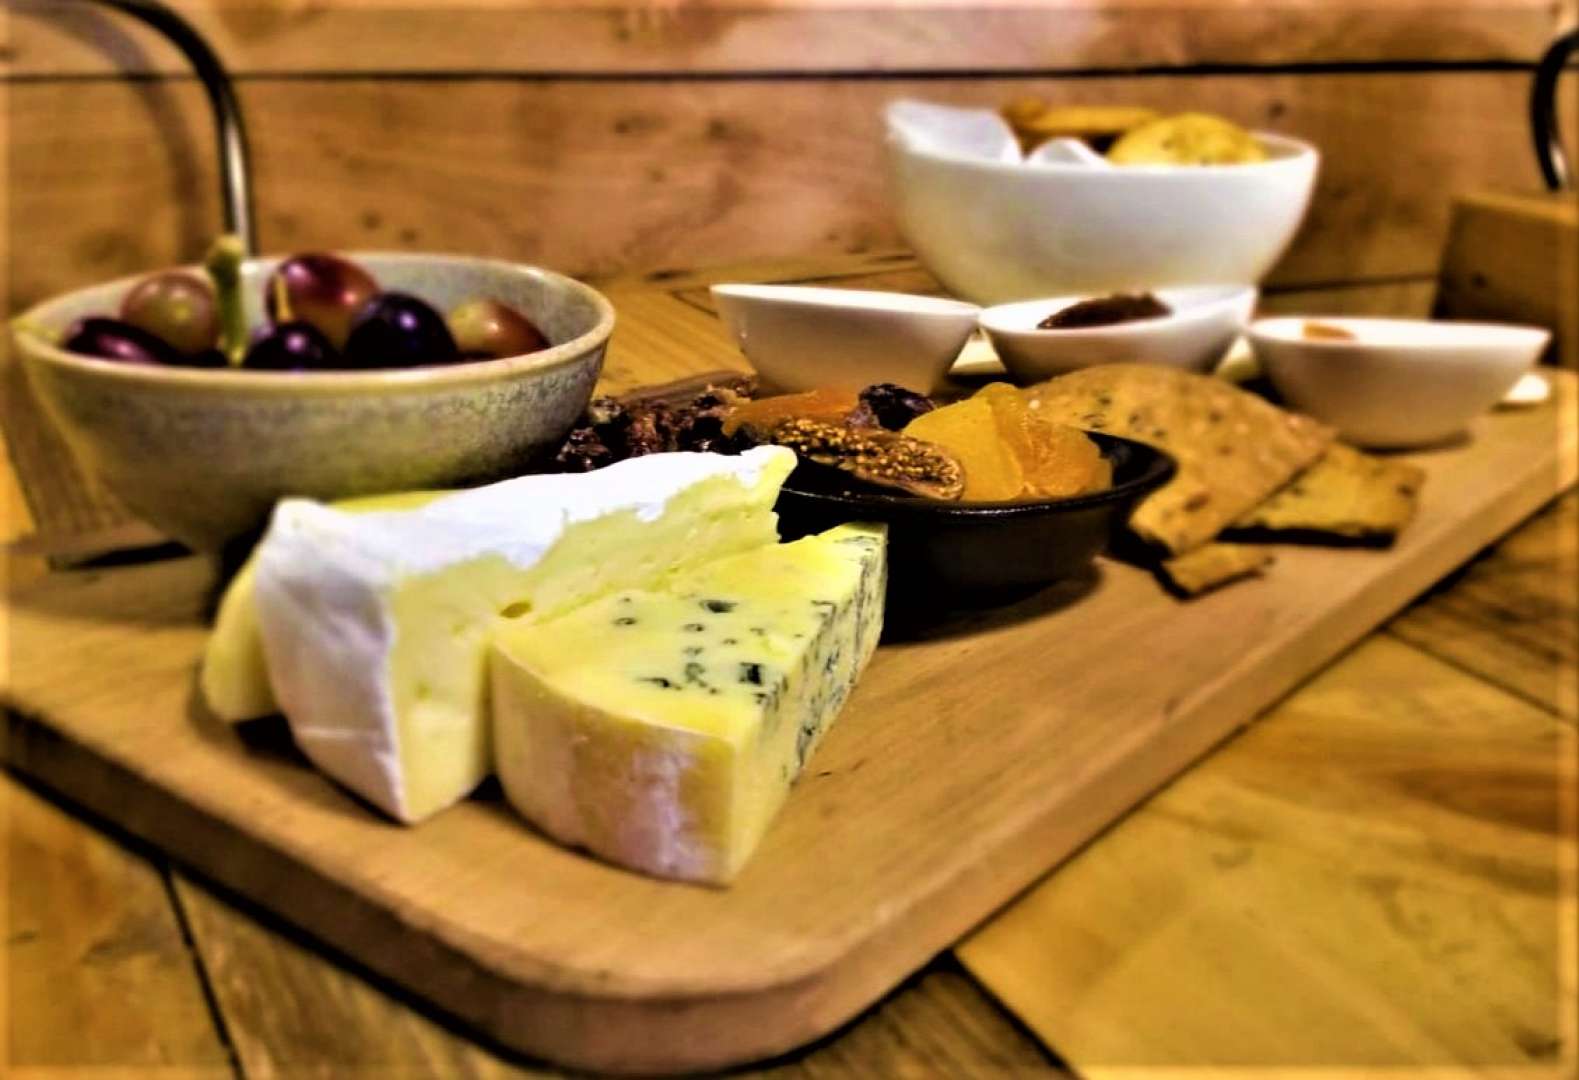 A lovely cheeseboard will acompany one of the wine tastings.